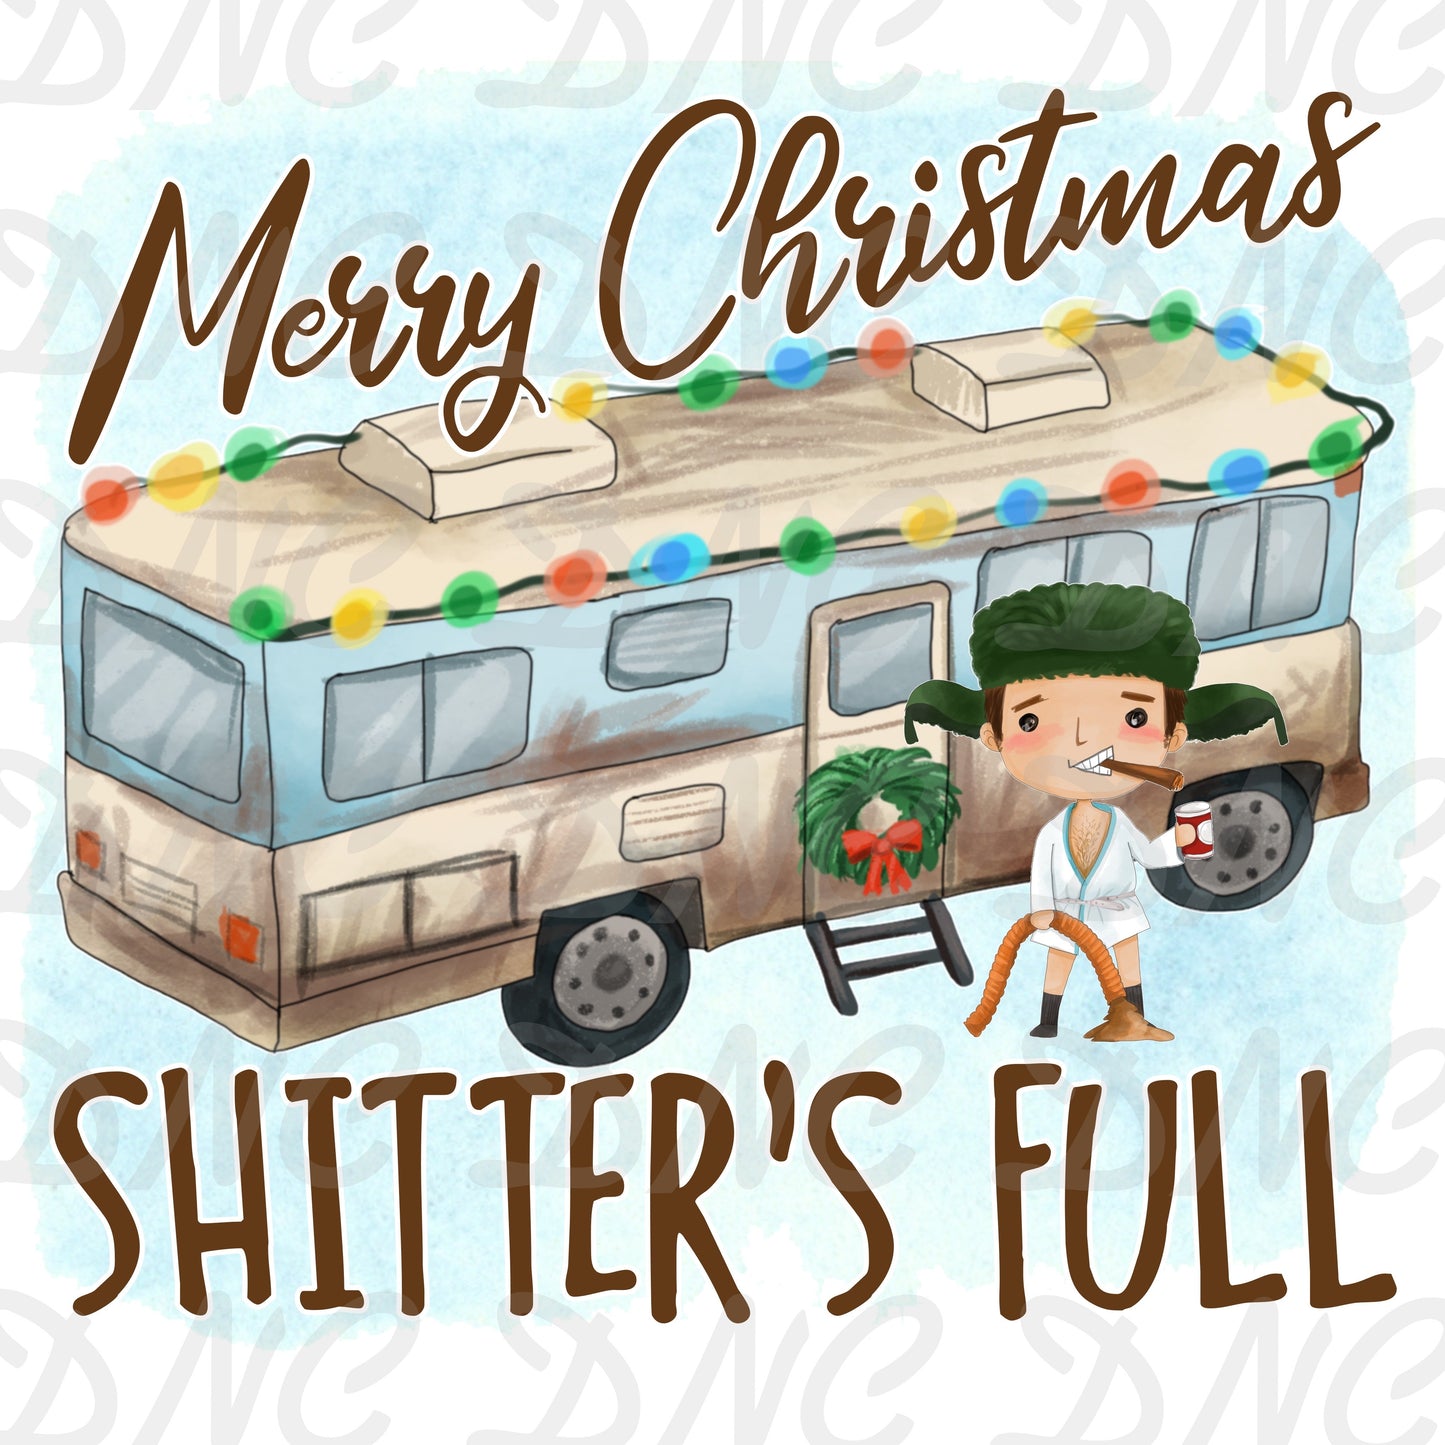 Christmas vacation merry christmas shitters full  - Sublimation